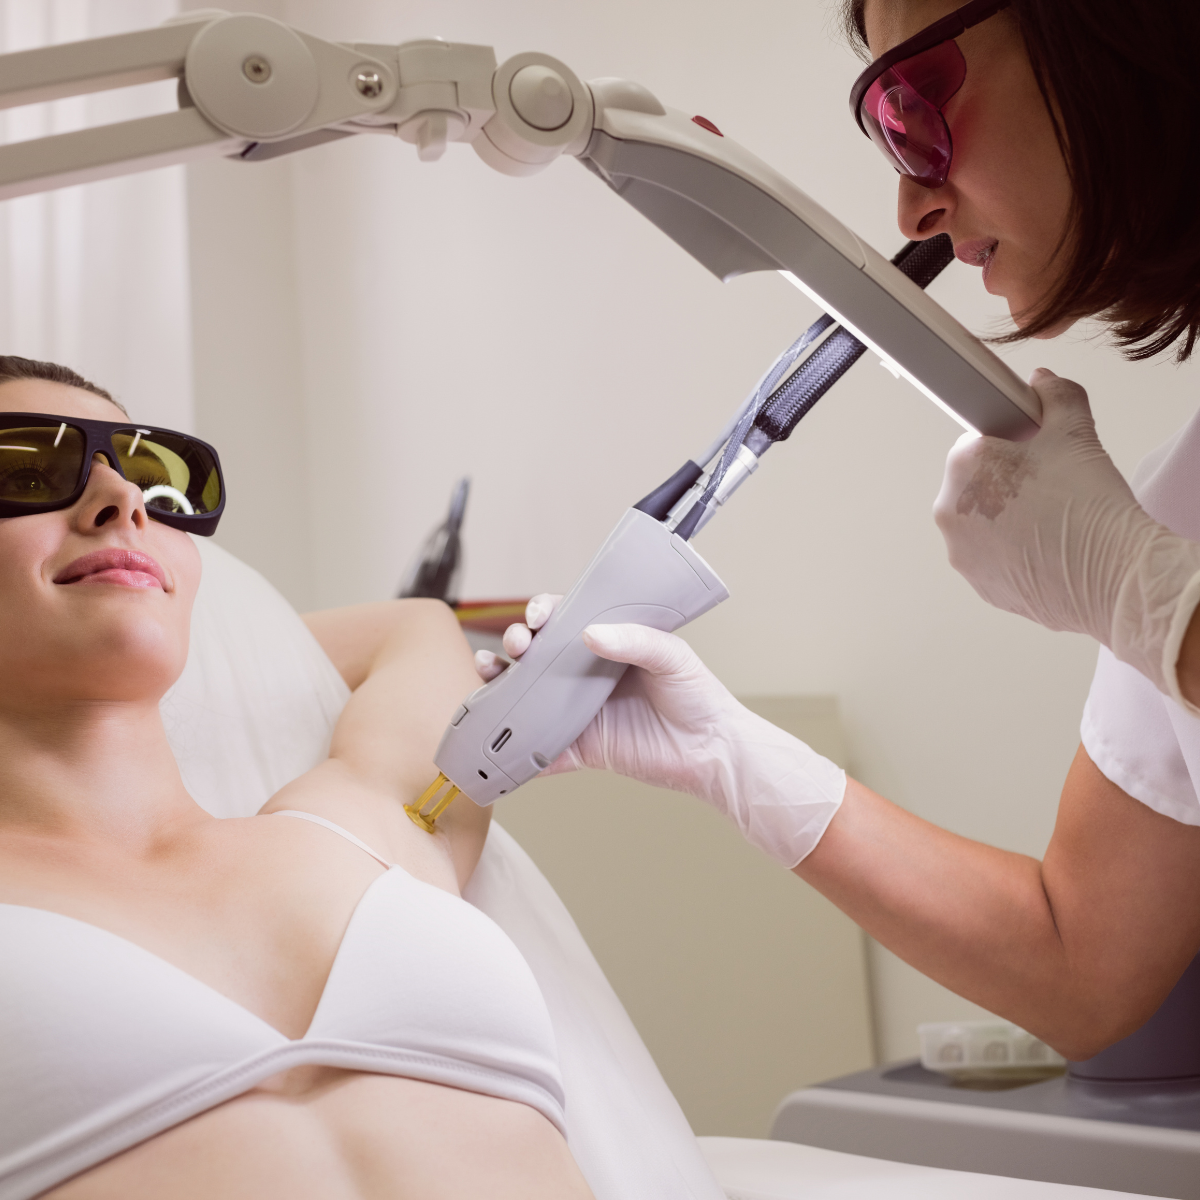 What To Consider While Choosing a Laser Hair Removal Treatment Clinic?